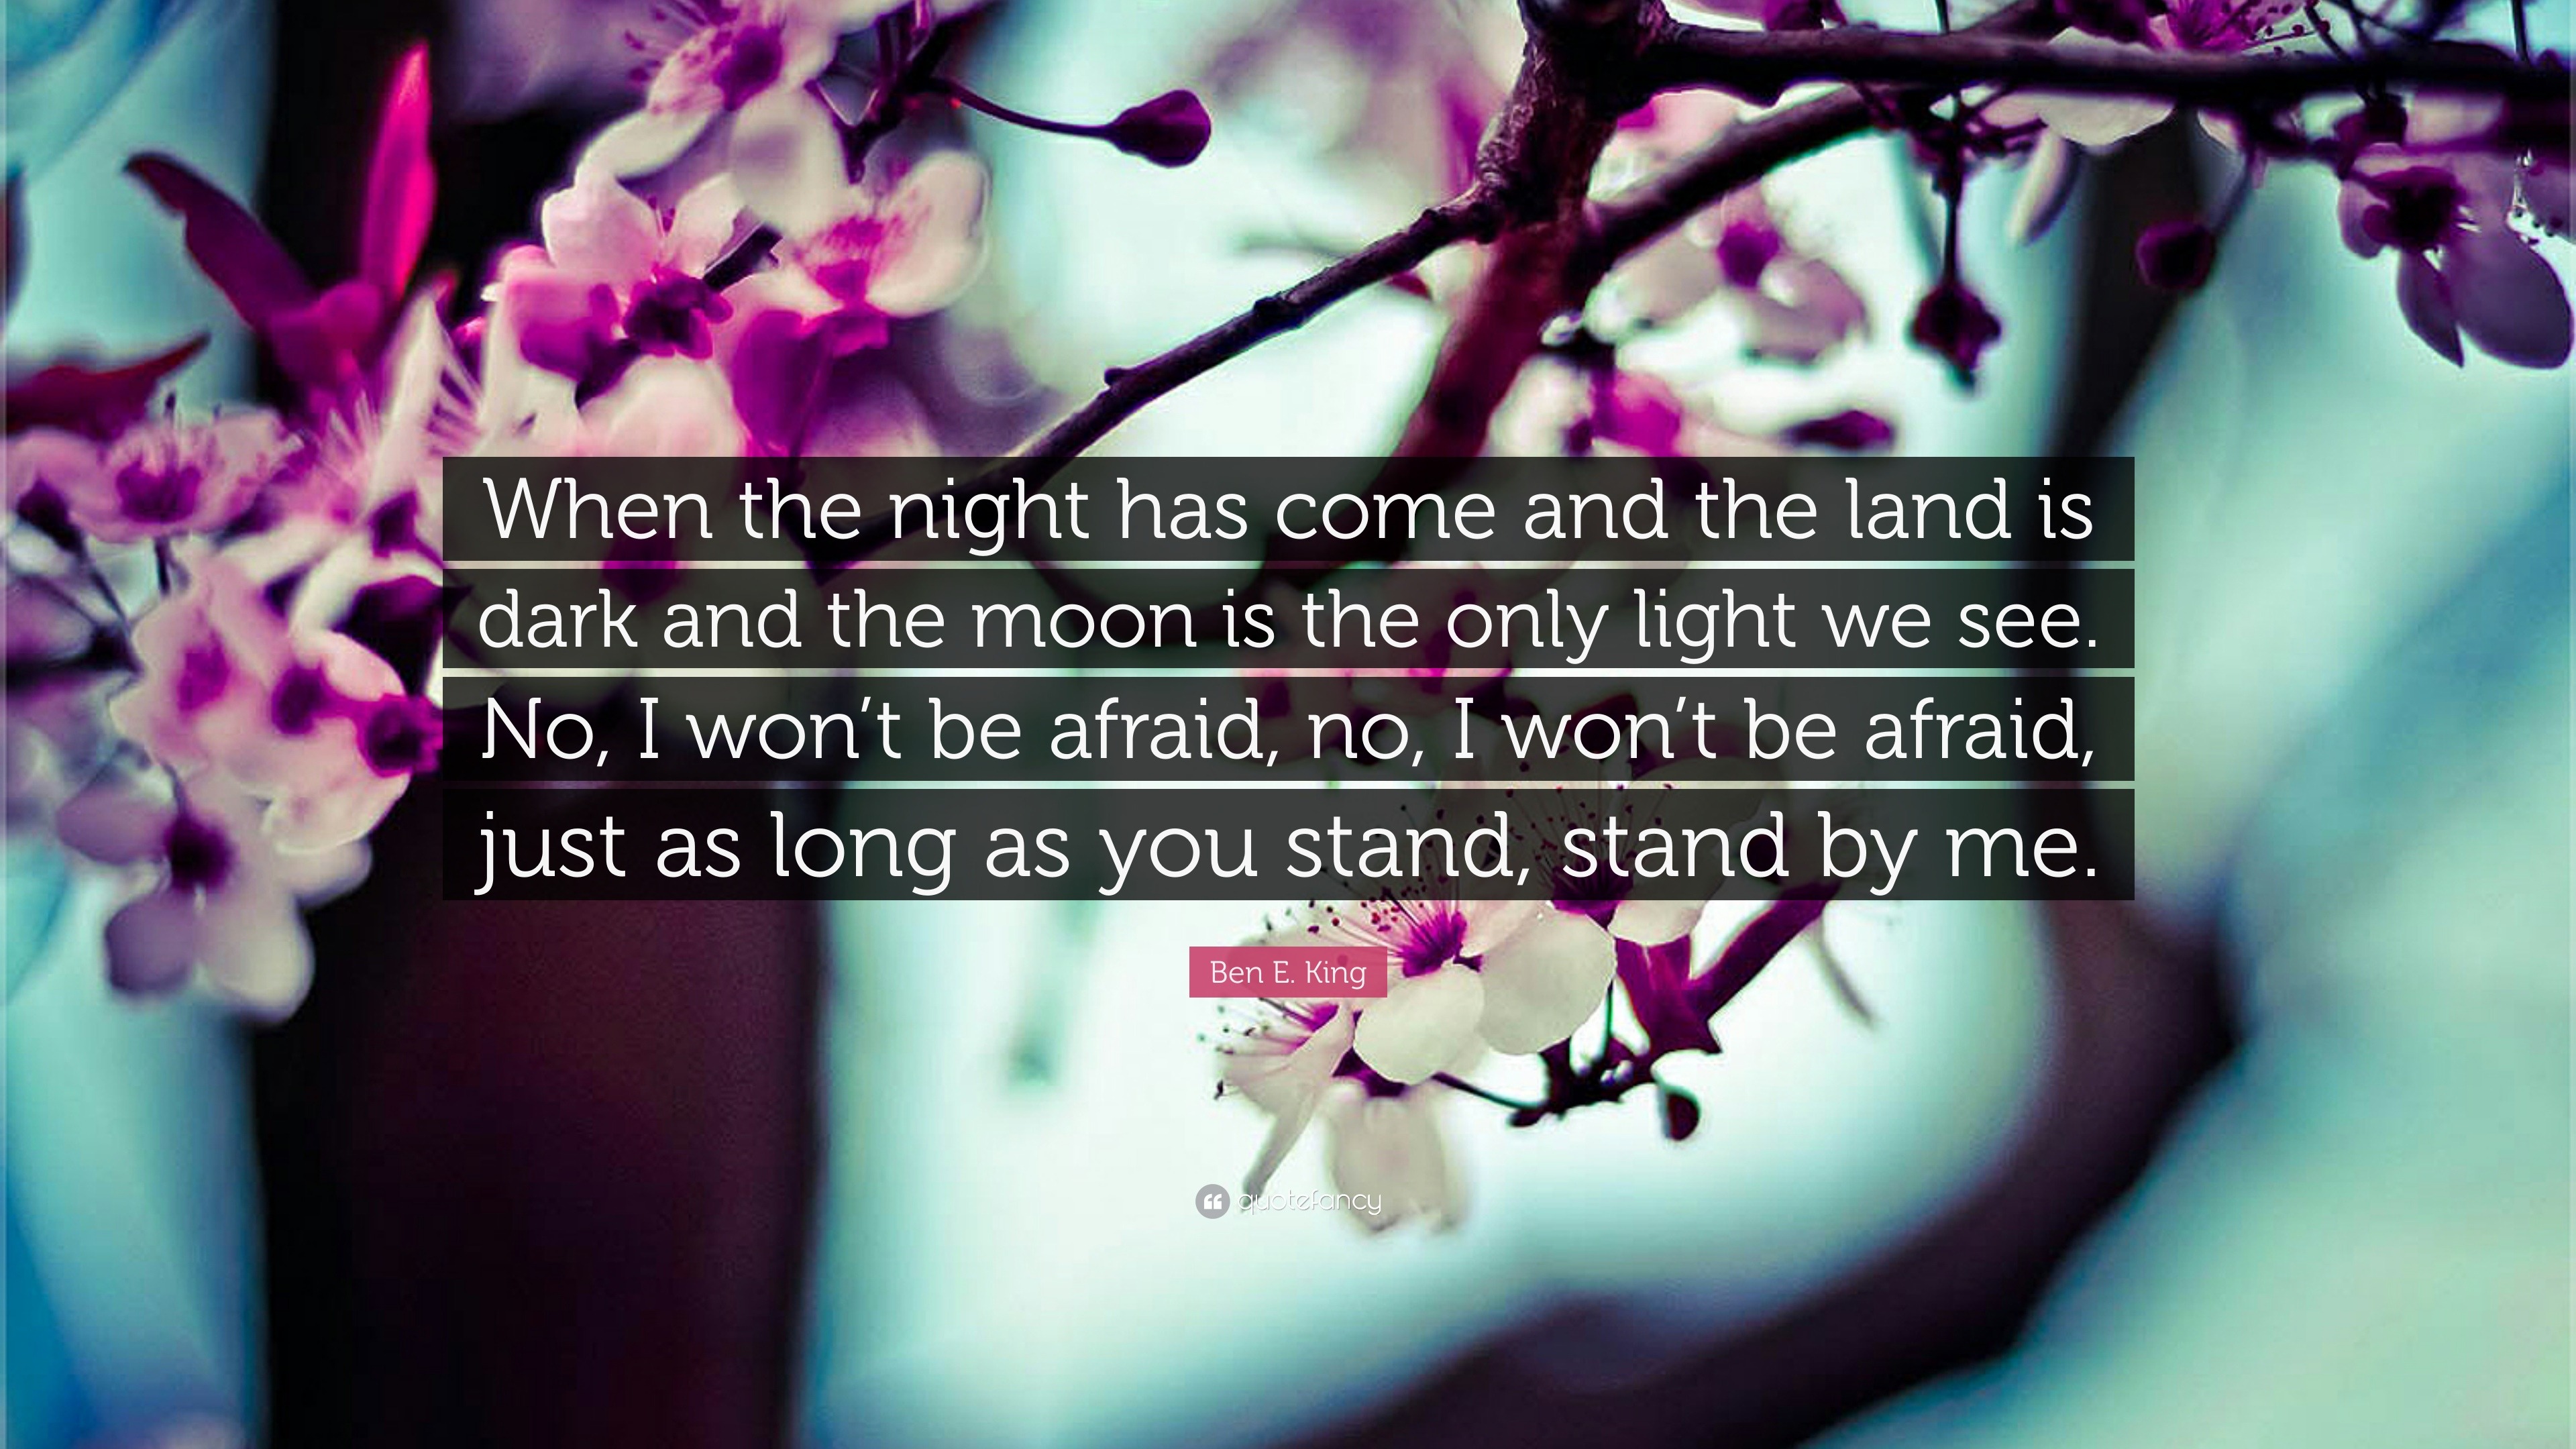 E. King Quote: “When the night has come and the land is dark and the moon the only light we see. No, I won't be afraid, no, I won't b...”